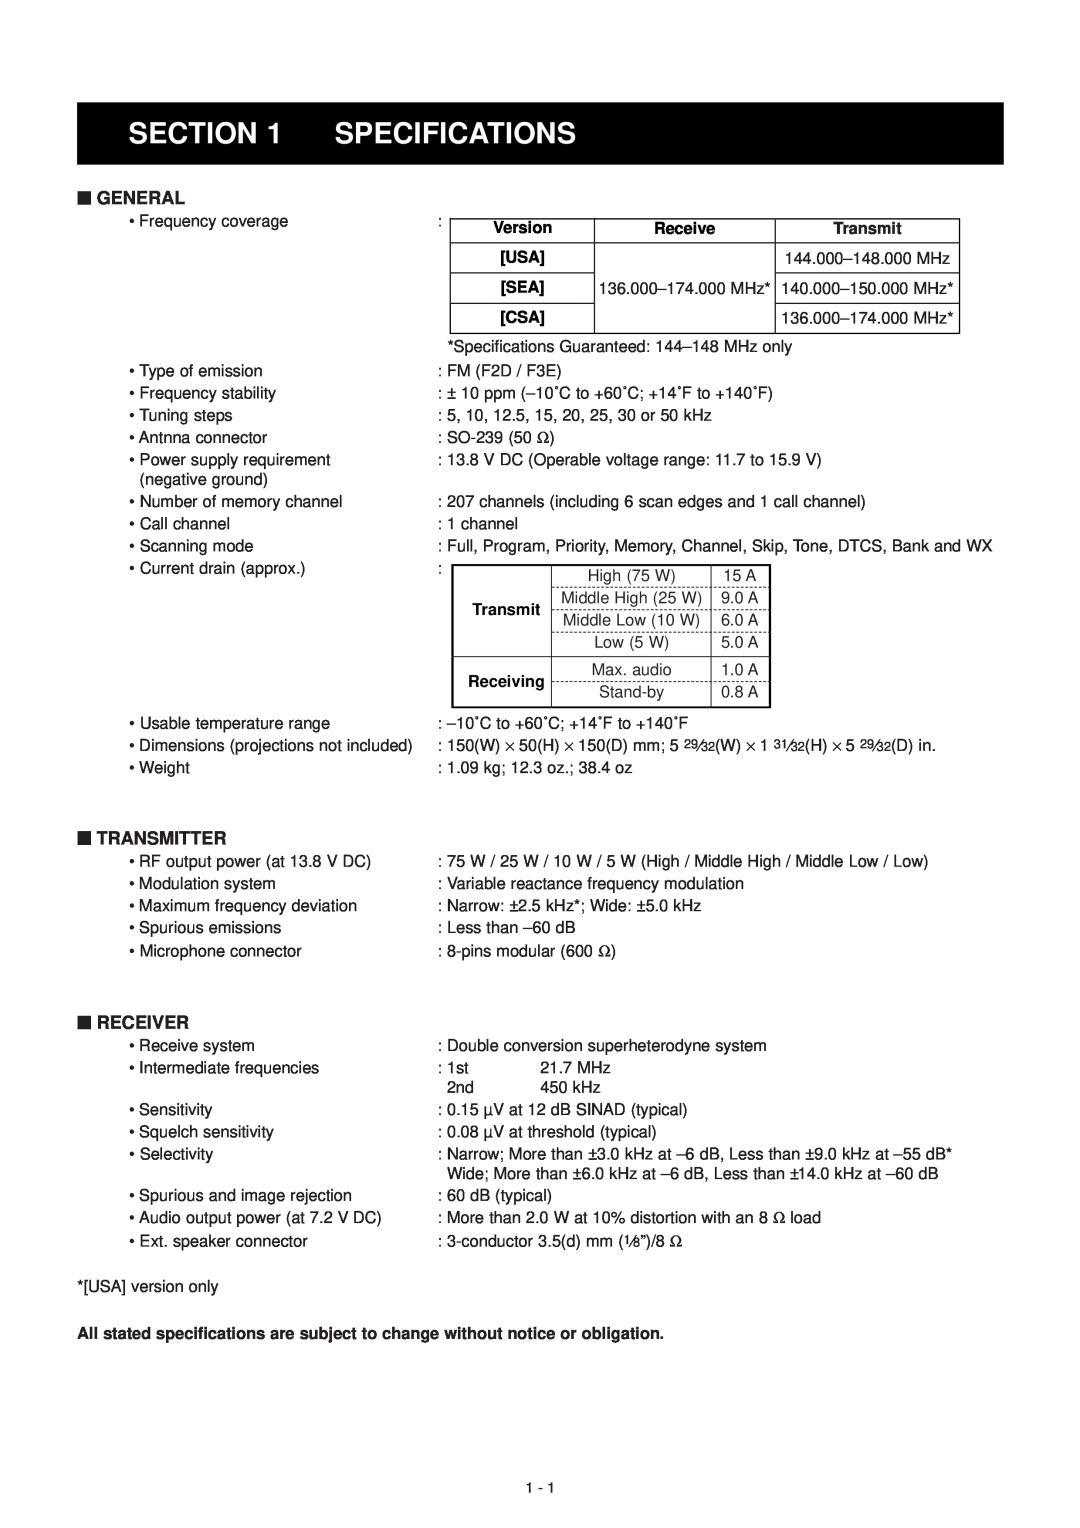 Polaroid IC-V8000 service manual Specifications, ‘ General, ‘ Transmitter, ‘ Receiver 